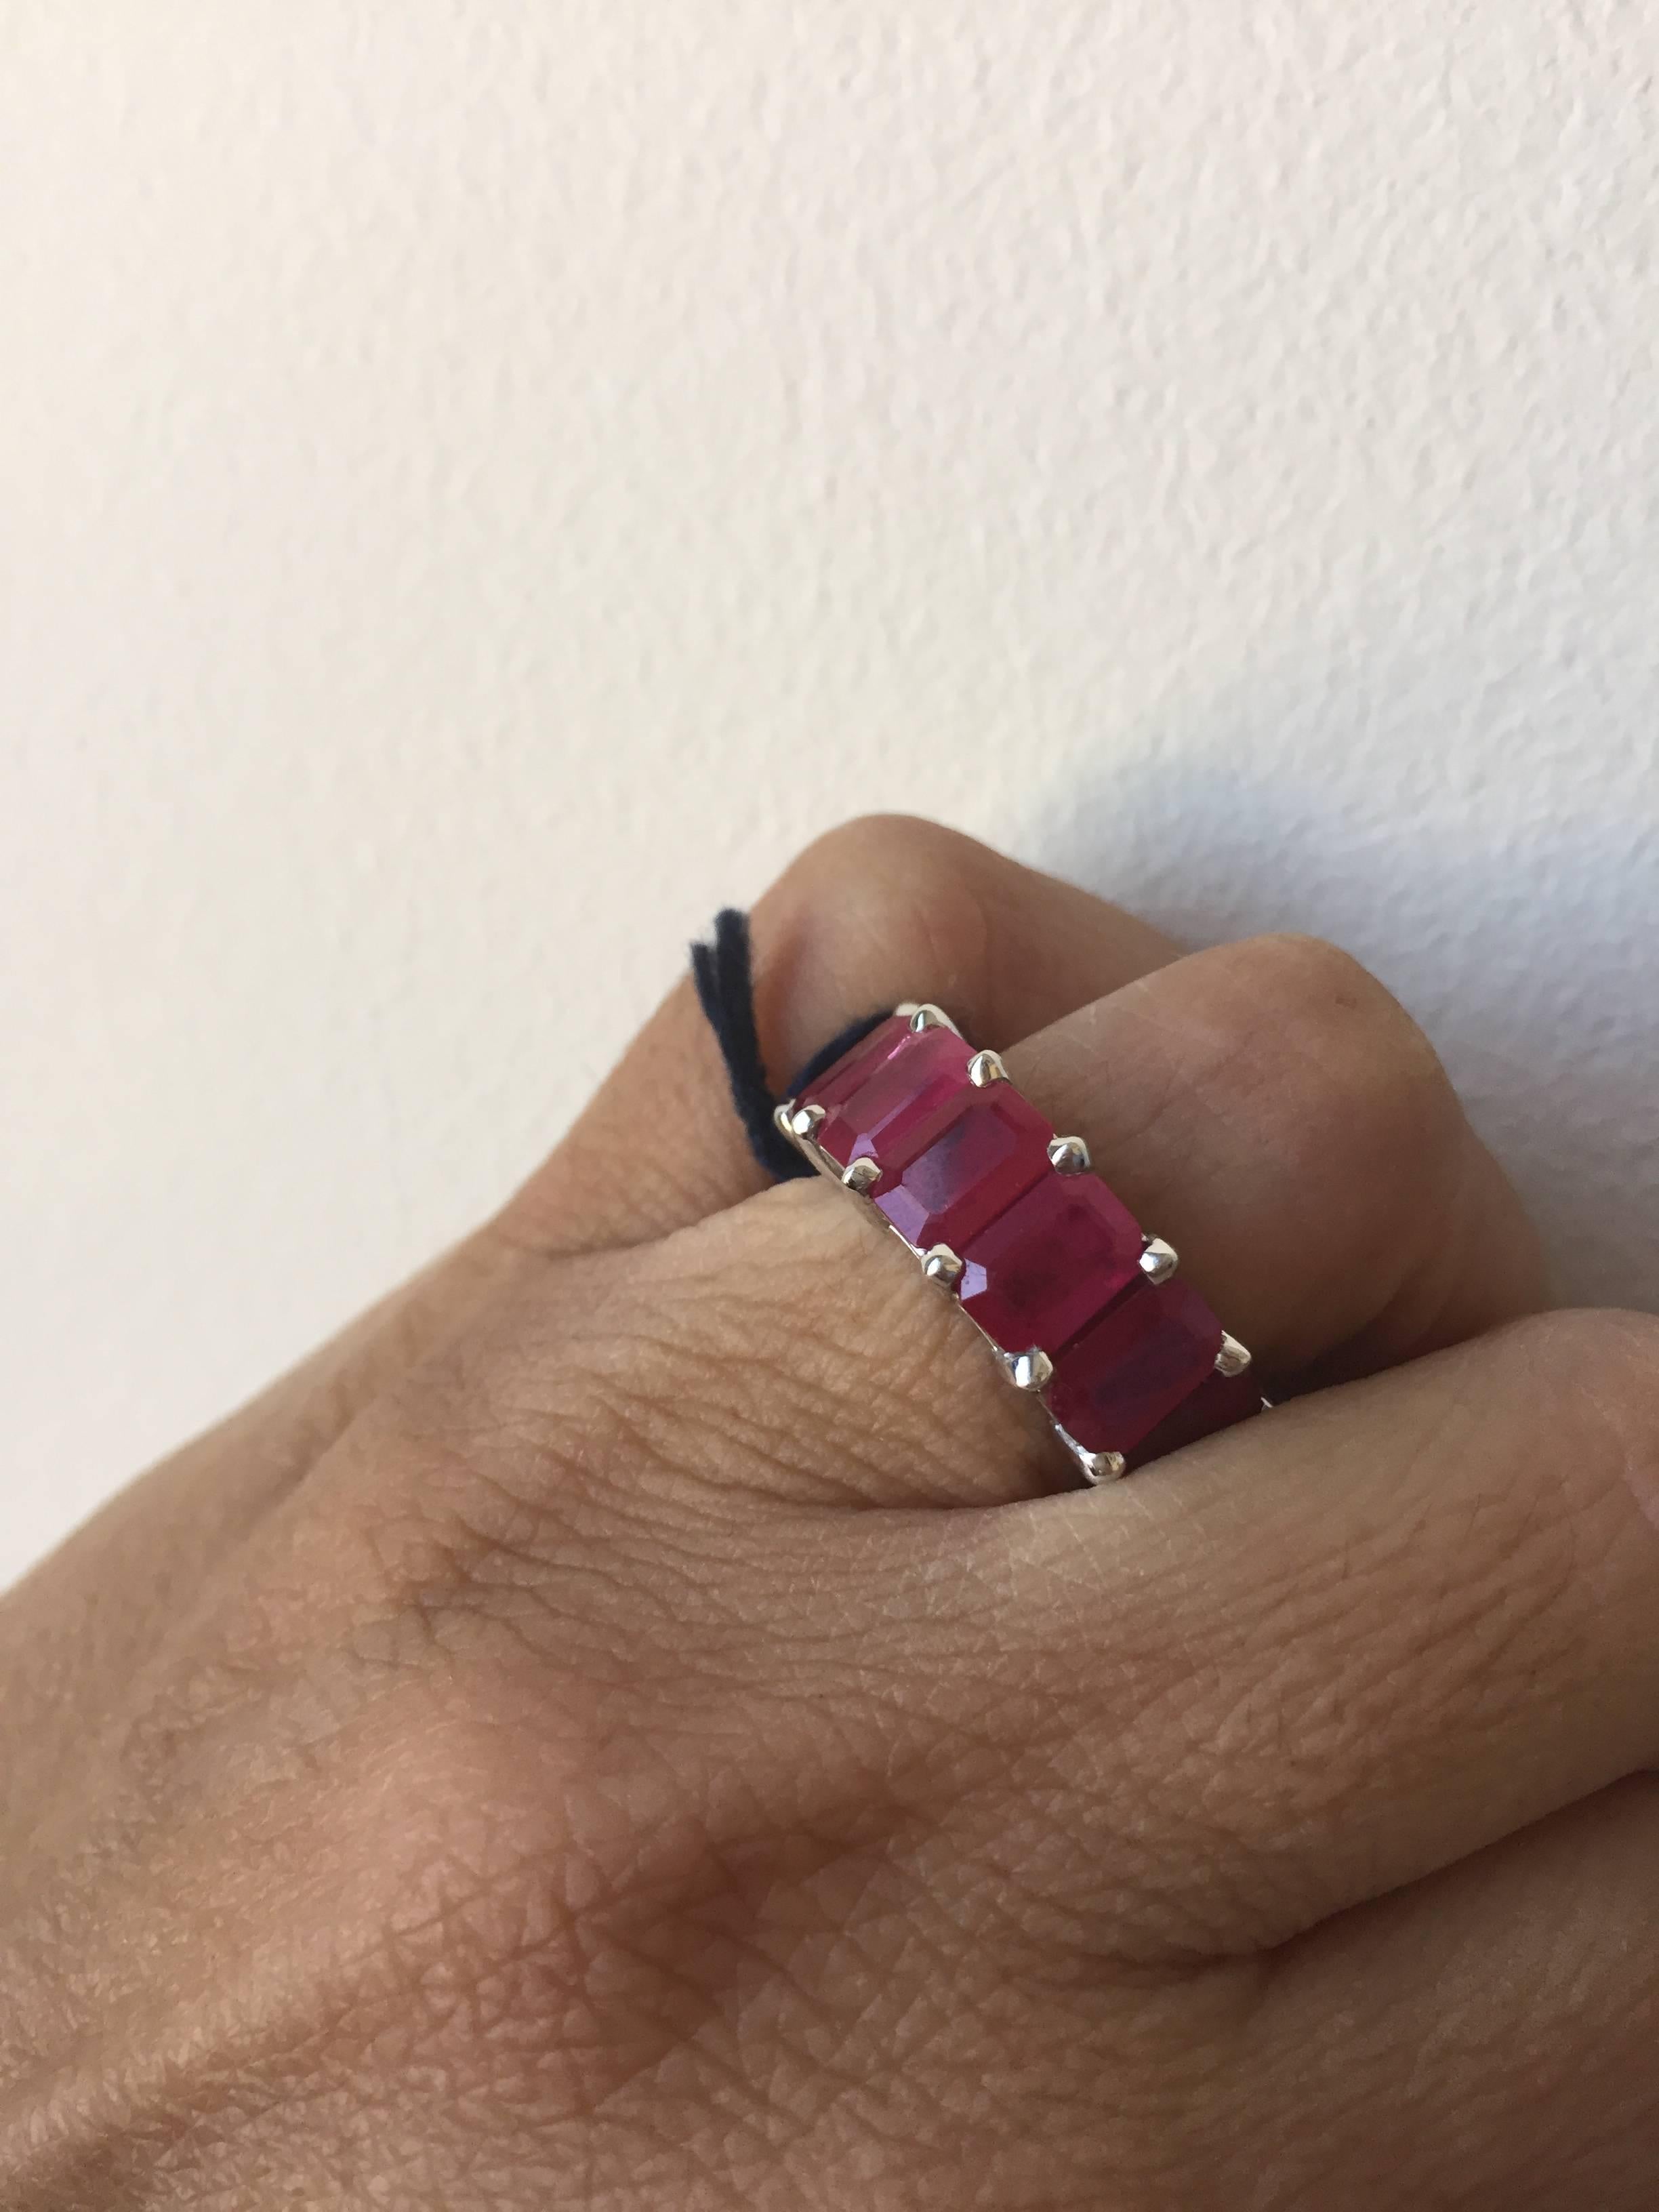 Exquisite one of a kind eternity, Burma Ruby Ring set in 18K white gold. The stones in this ring are emerald cut, each stone weighs approximately one carat. It is an absolutely stunning piece. The total weight is 15.22 carats. The ring is a size